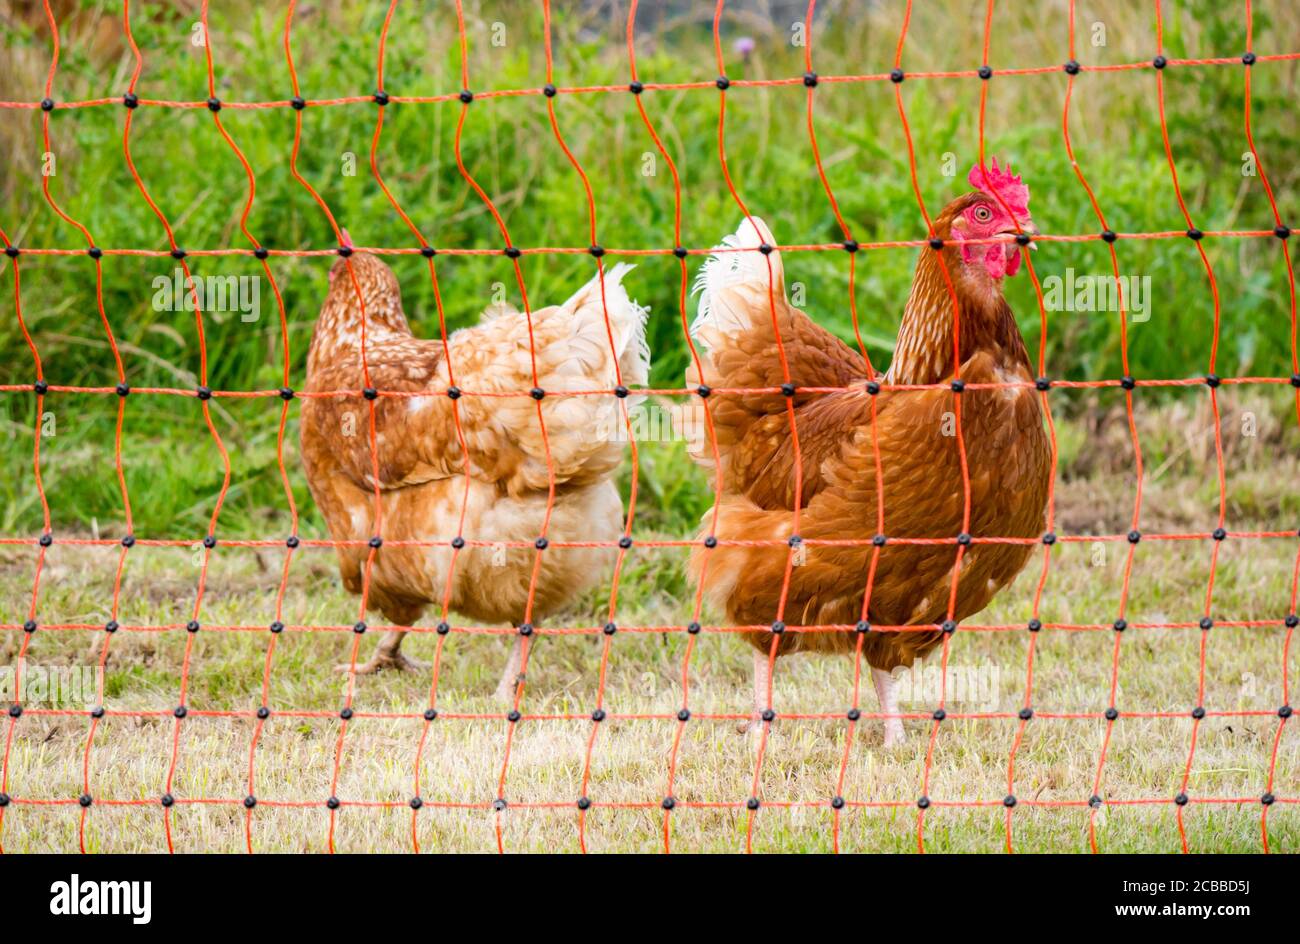 Chickens in chicken coop farmyard wth electric fence in Summer sunshine, UK Stock Photo